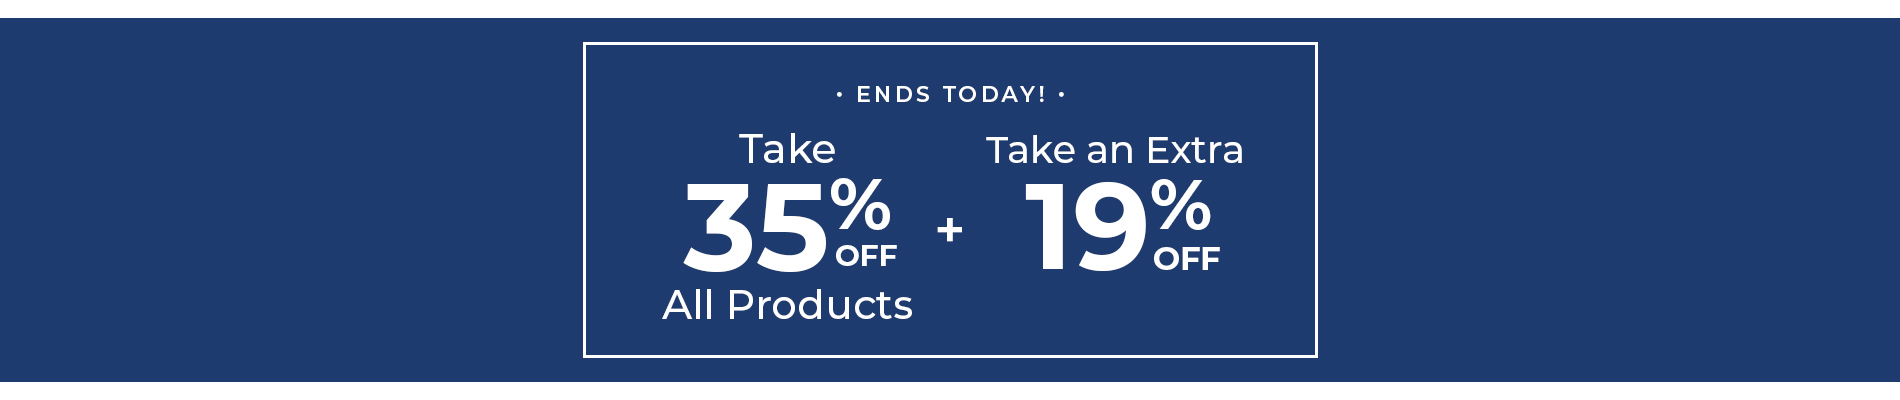 Take 35% Off + Extra 19% Off Everything